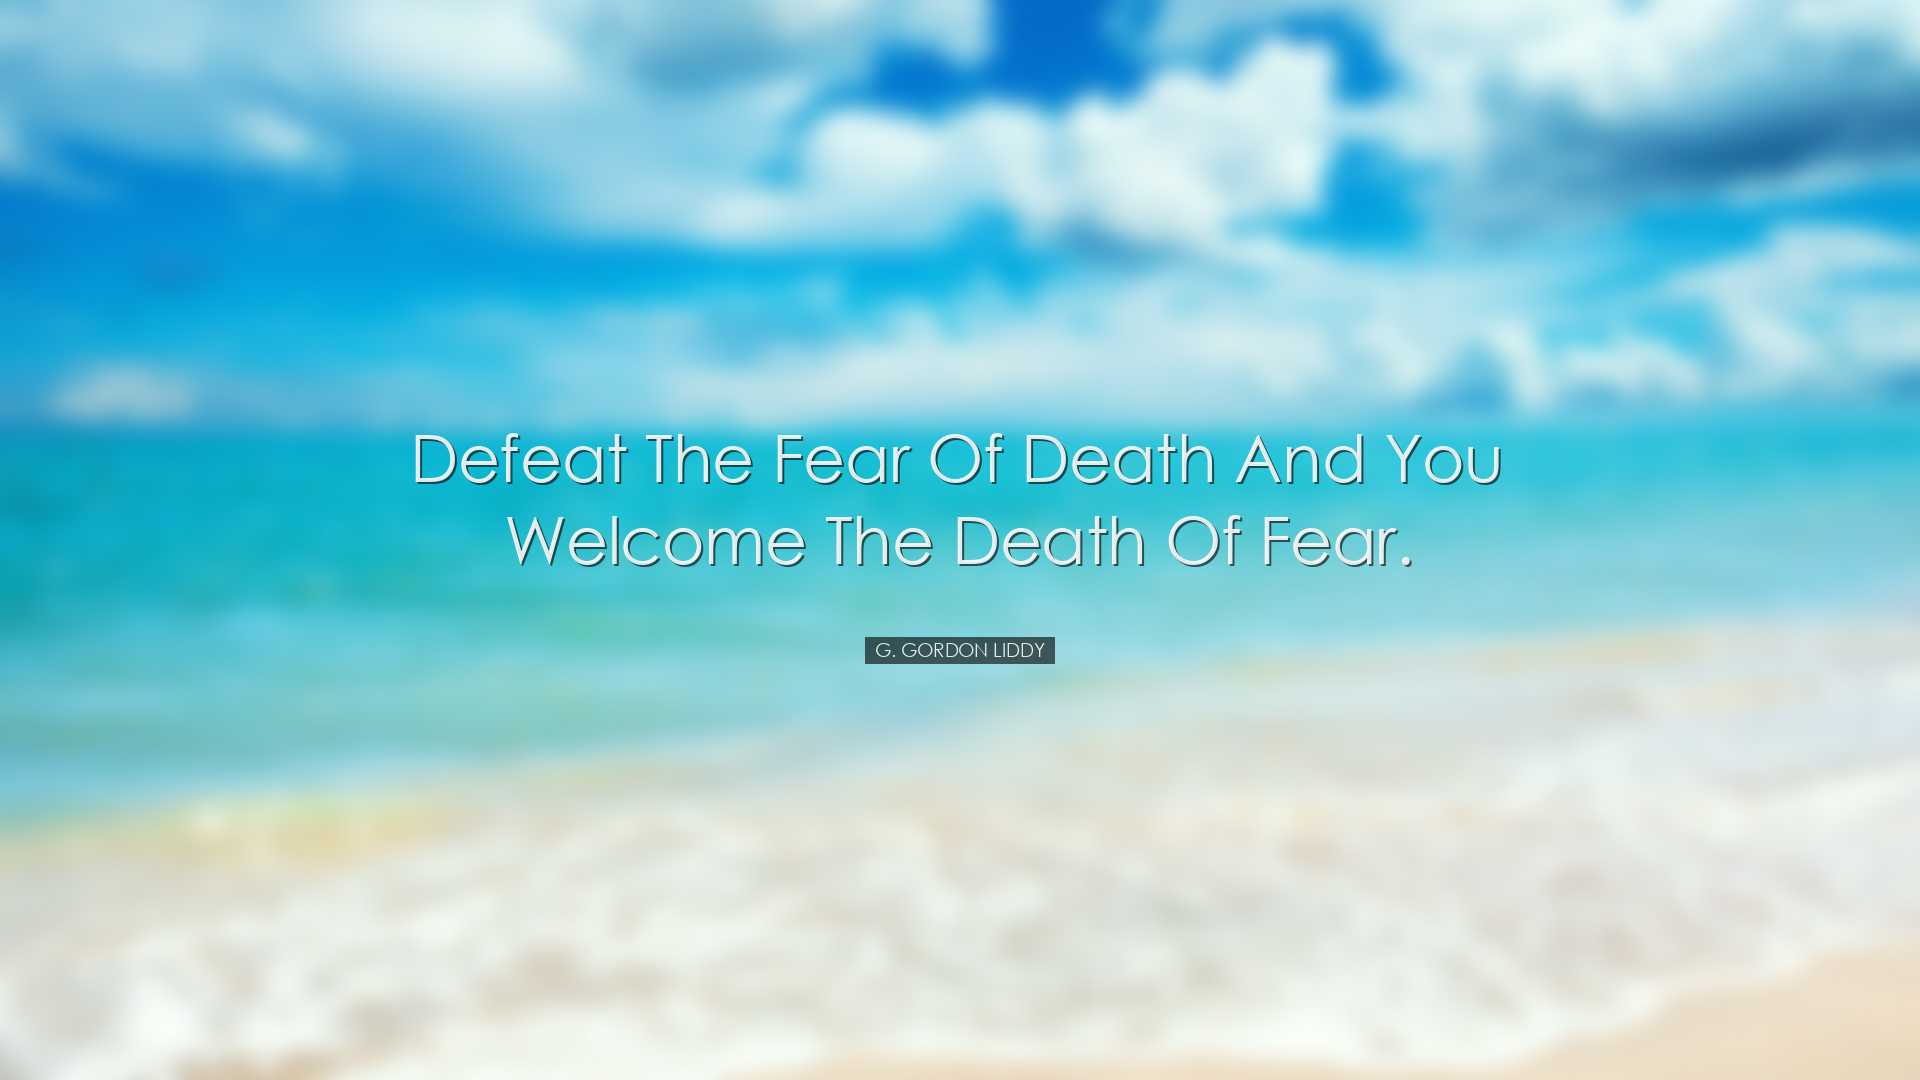 Defeat the fear of death and you welcome the death of fear. - G. G